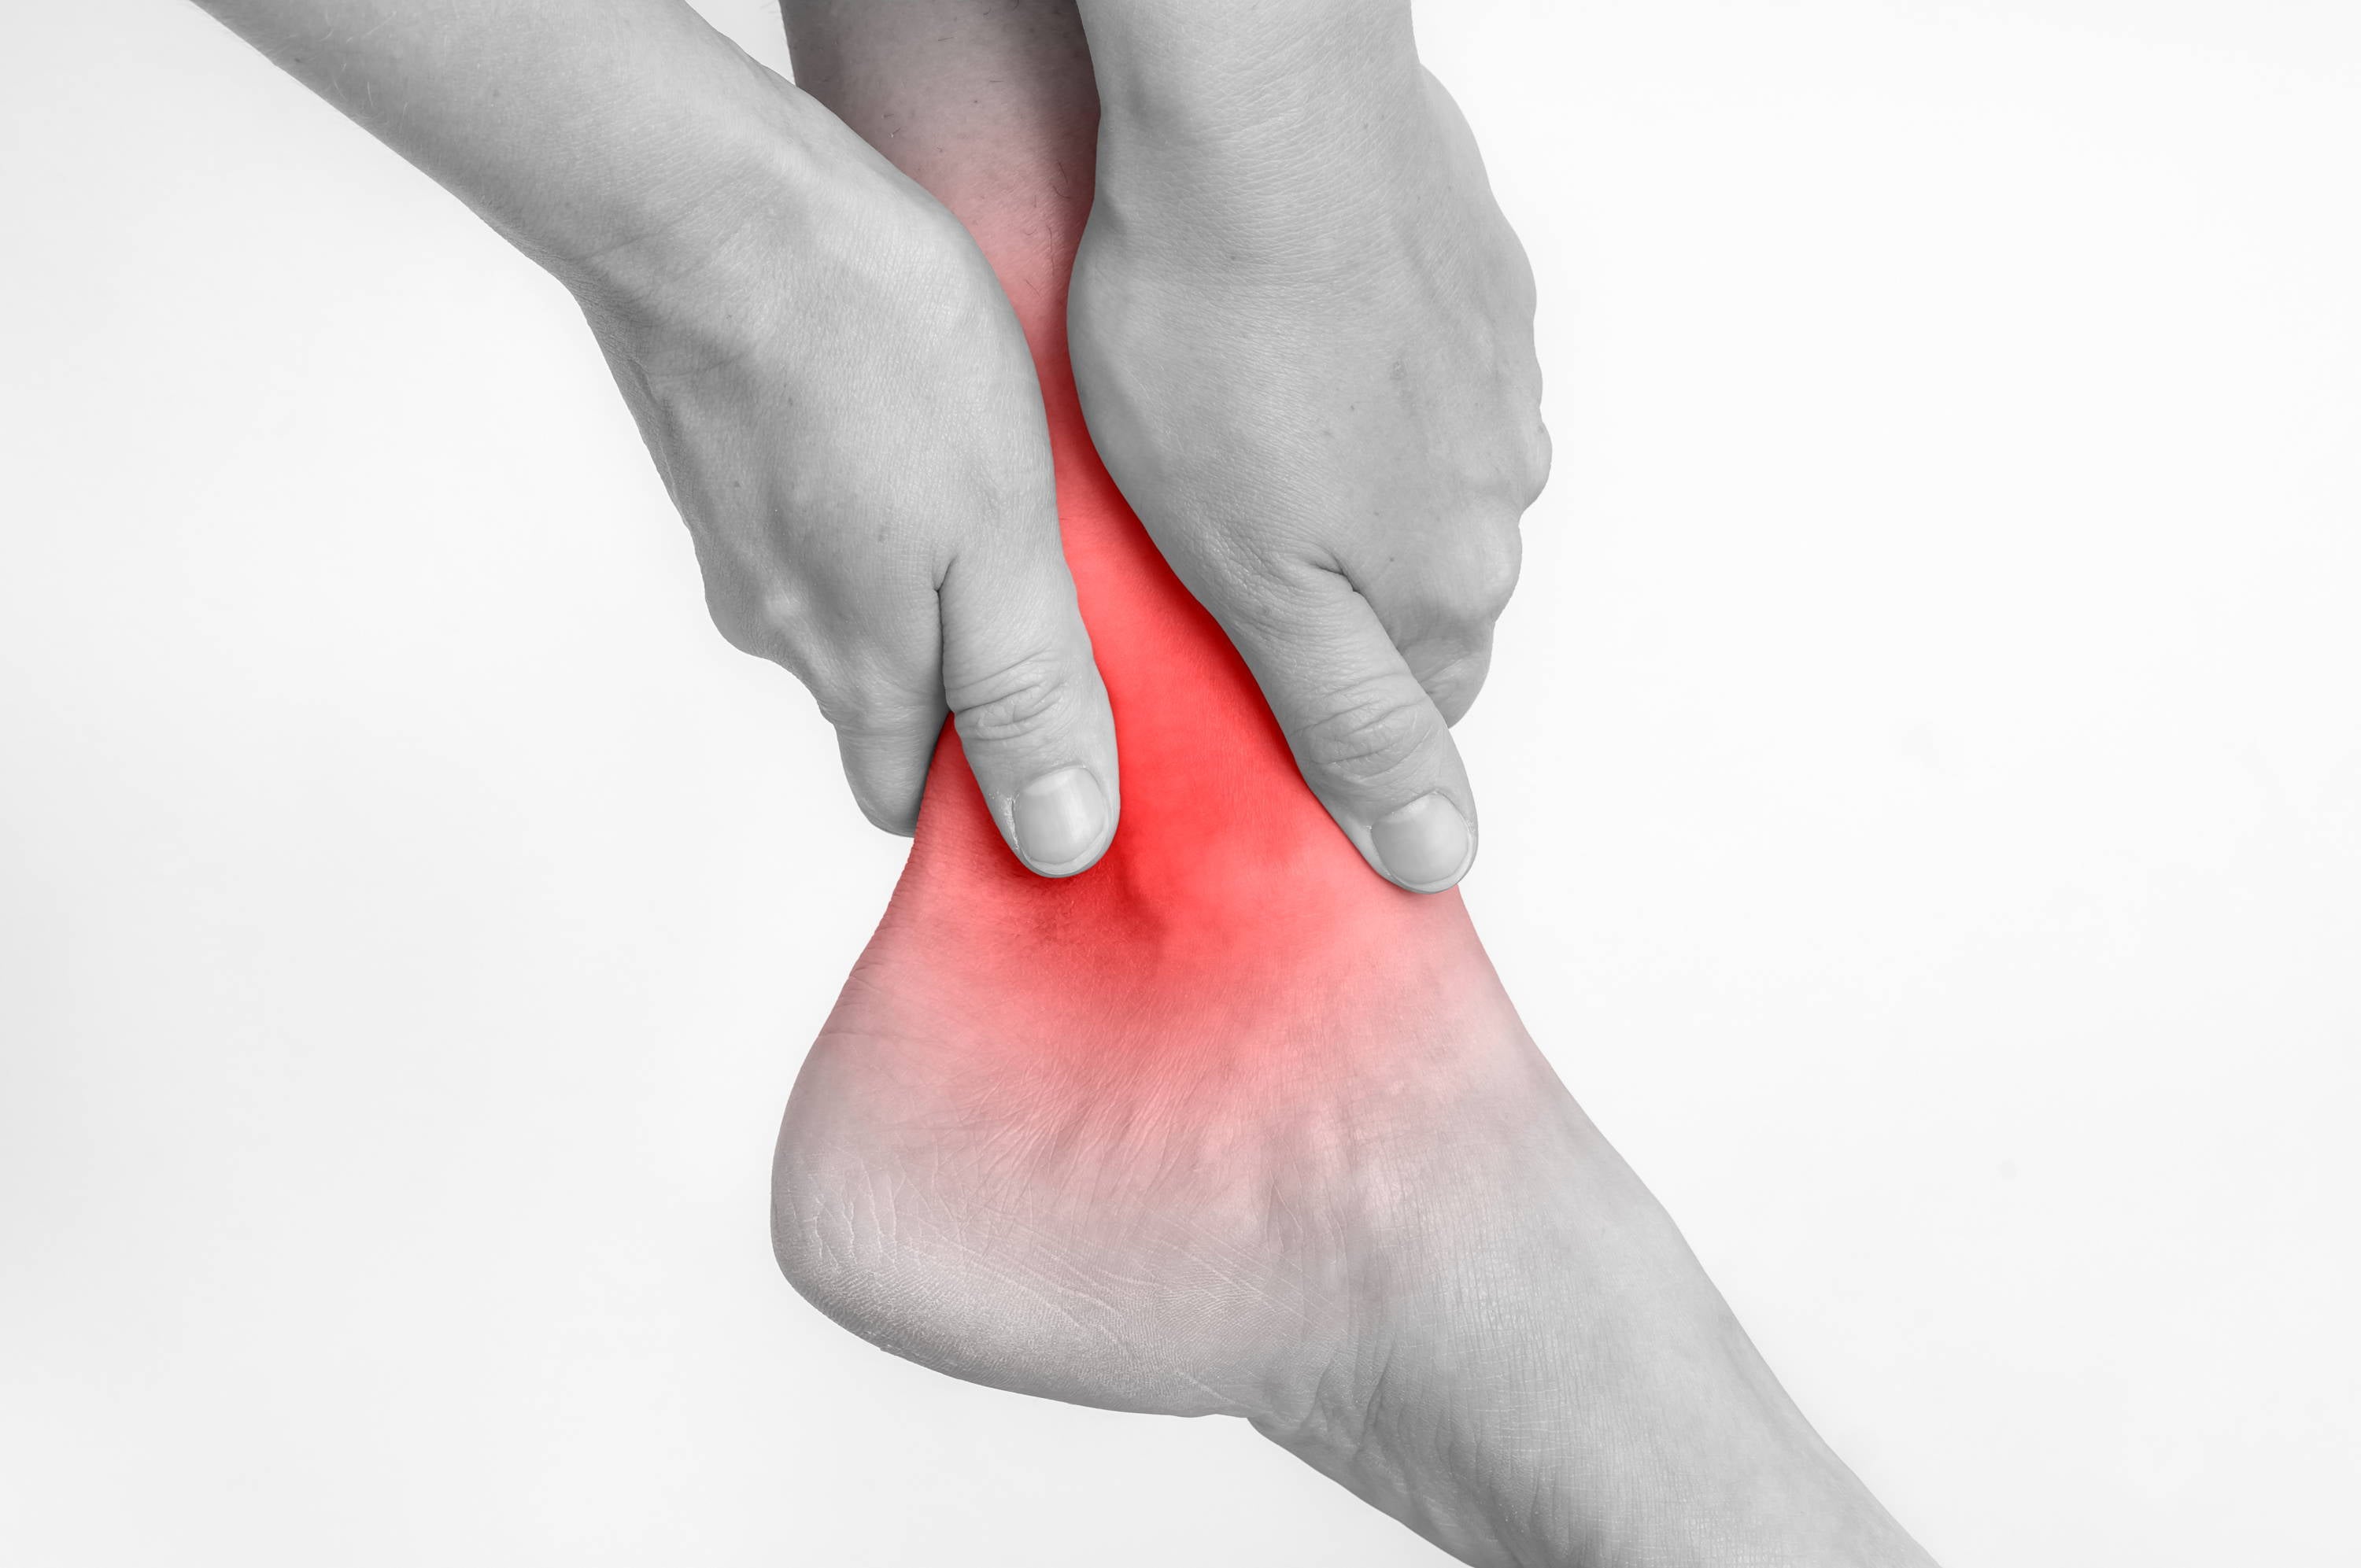 Sprained Ankle Treatment, Care & Recovery